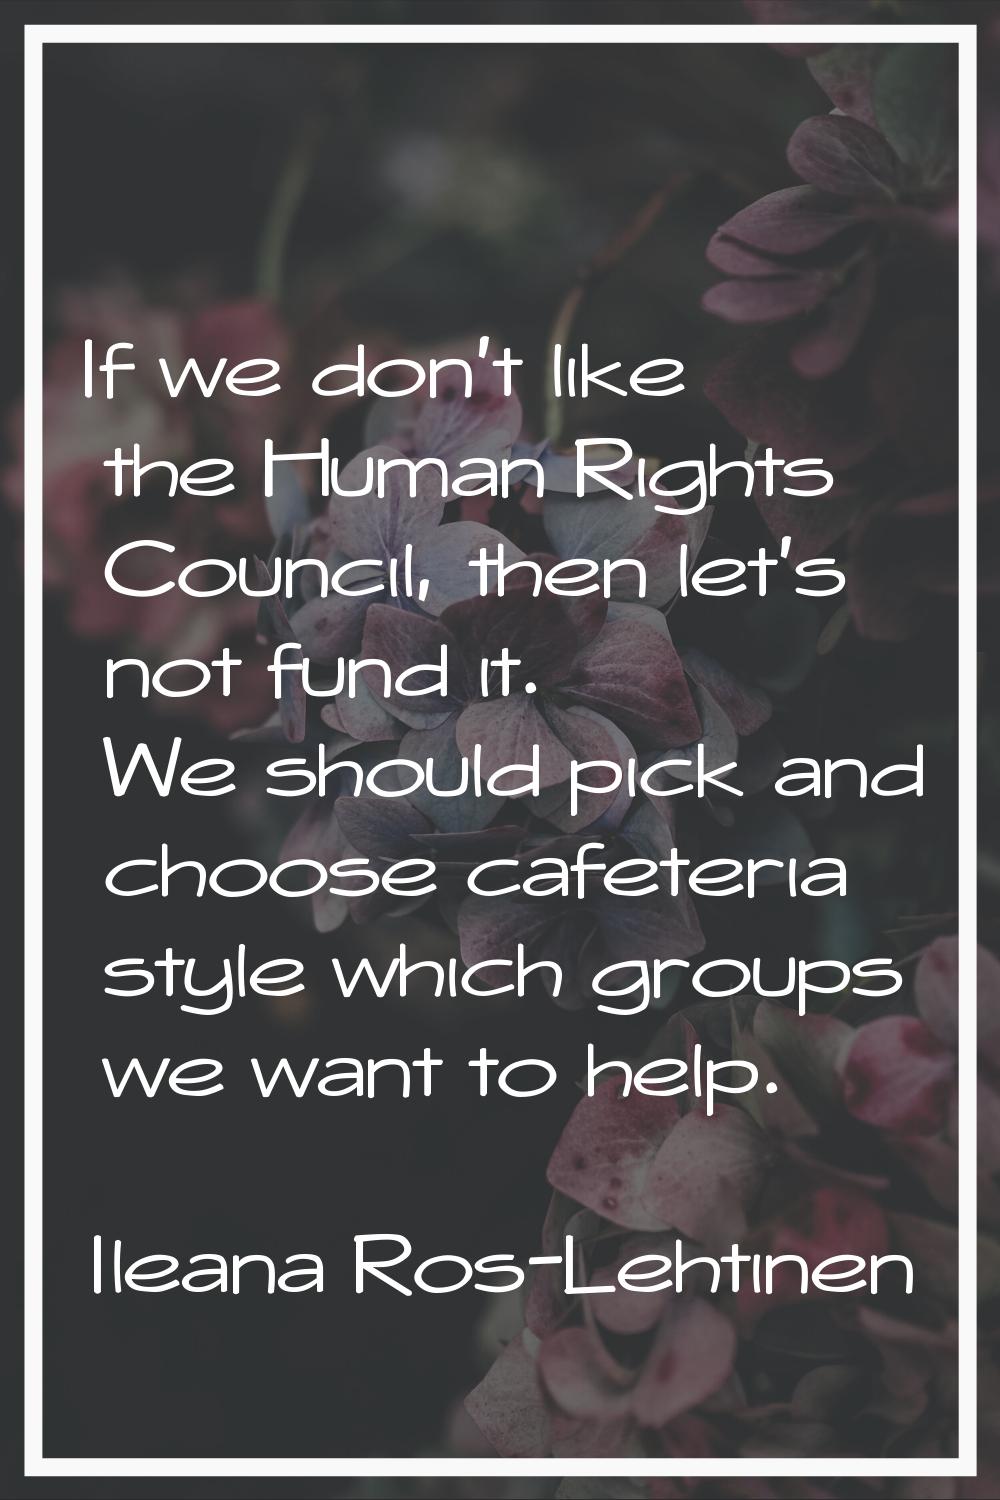 If we don't like the Human Rights Council, then let's not fund it. We should pick and choose cafete